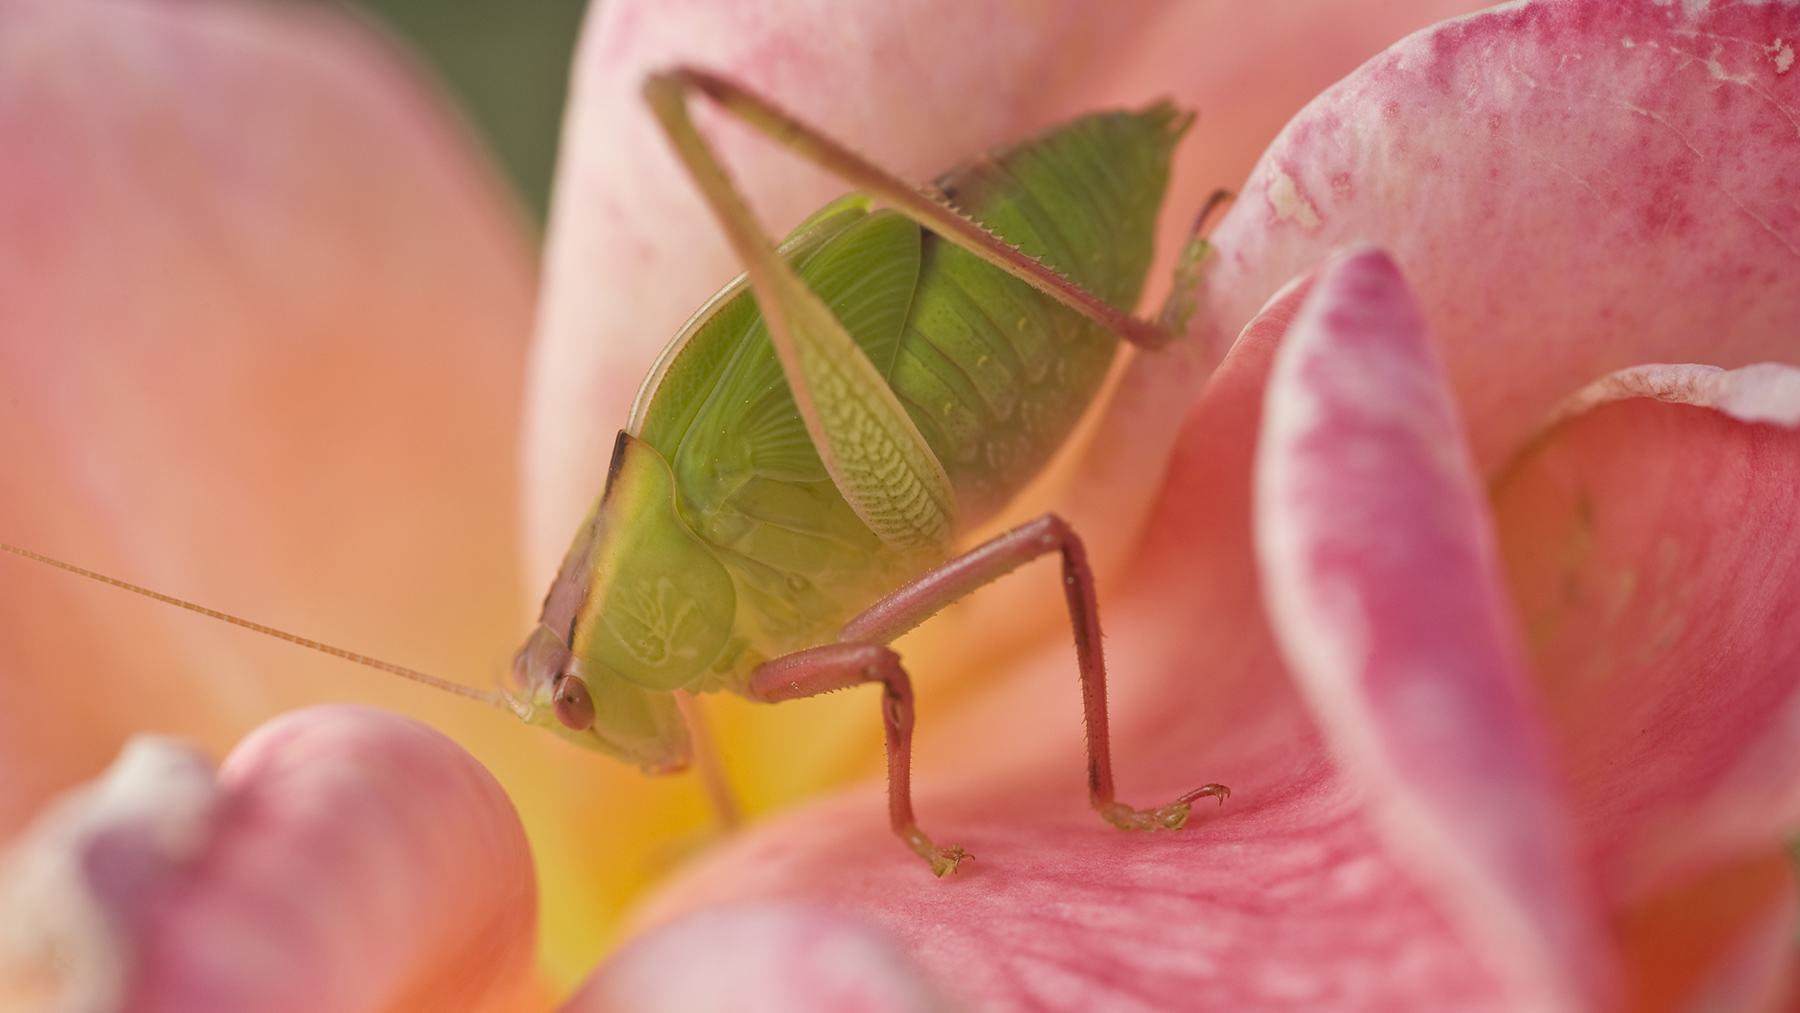 Green aphid on a pink rose petal